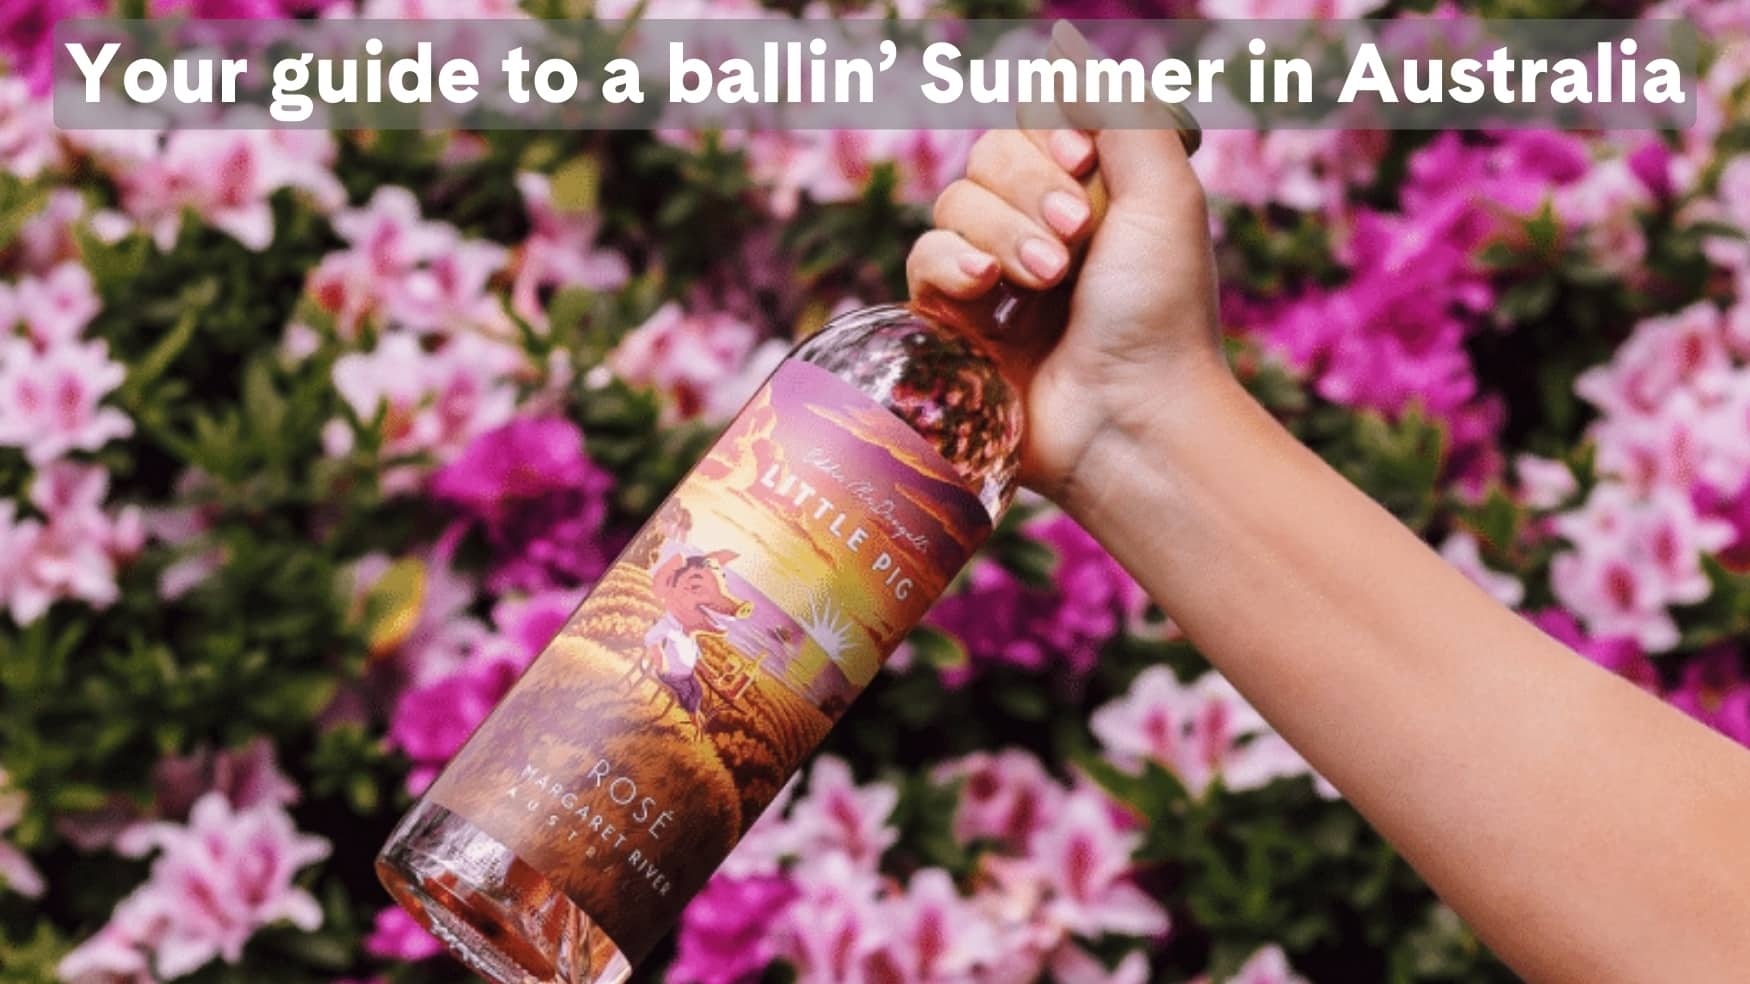 Your guide to a ballin’ Summer in Australia